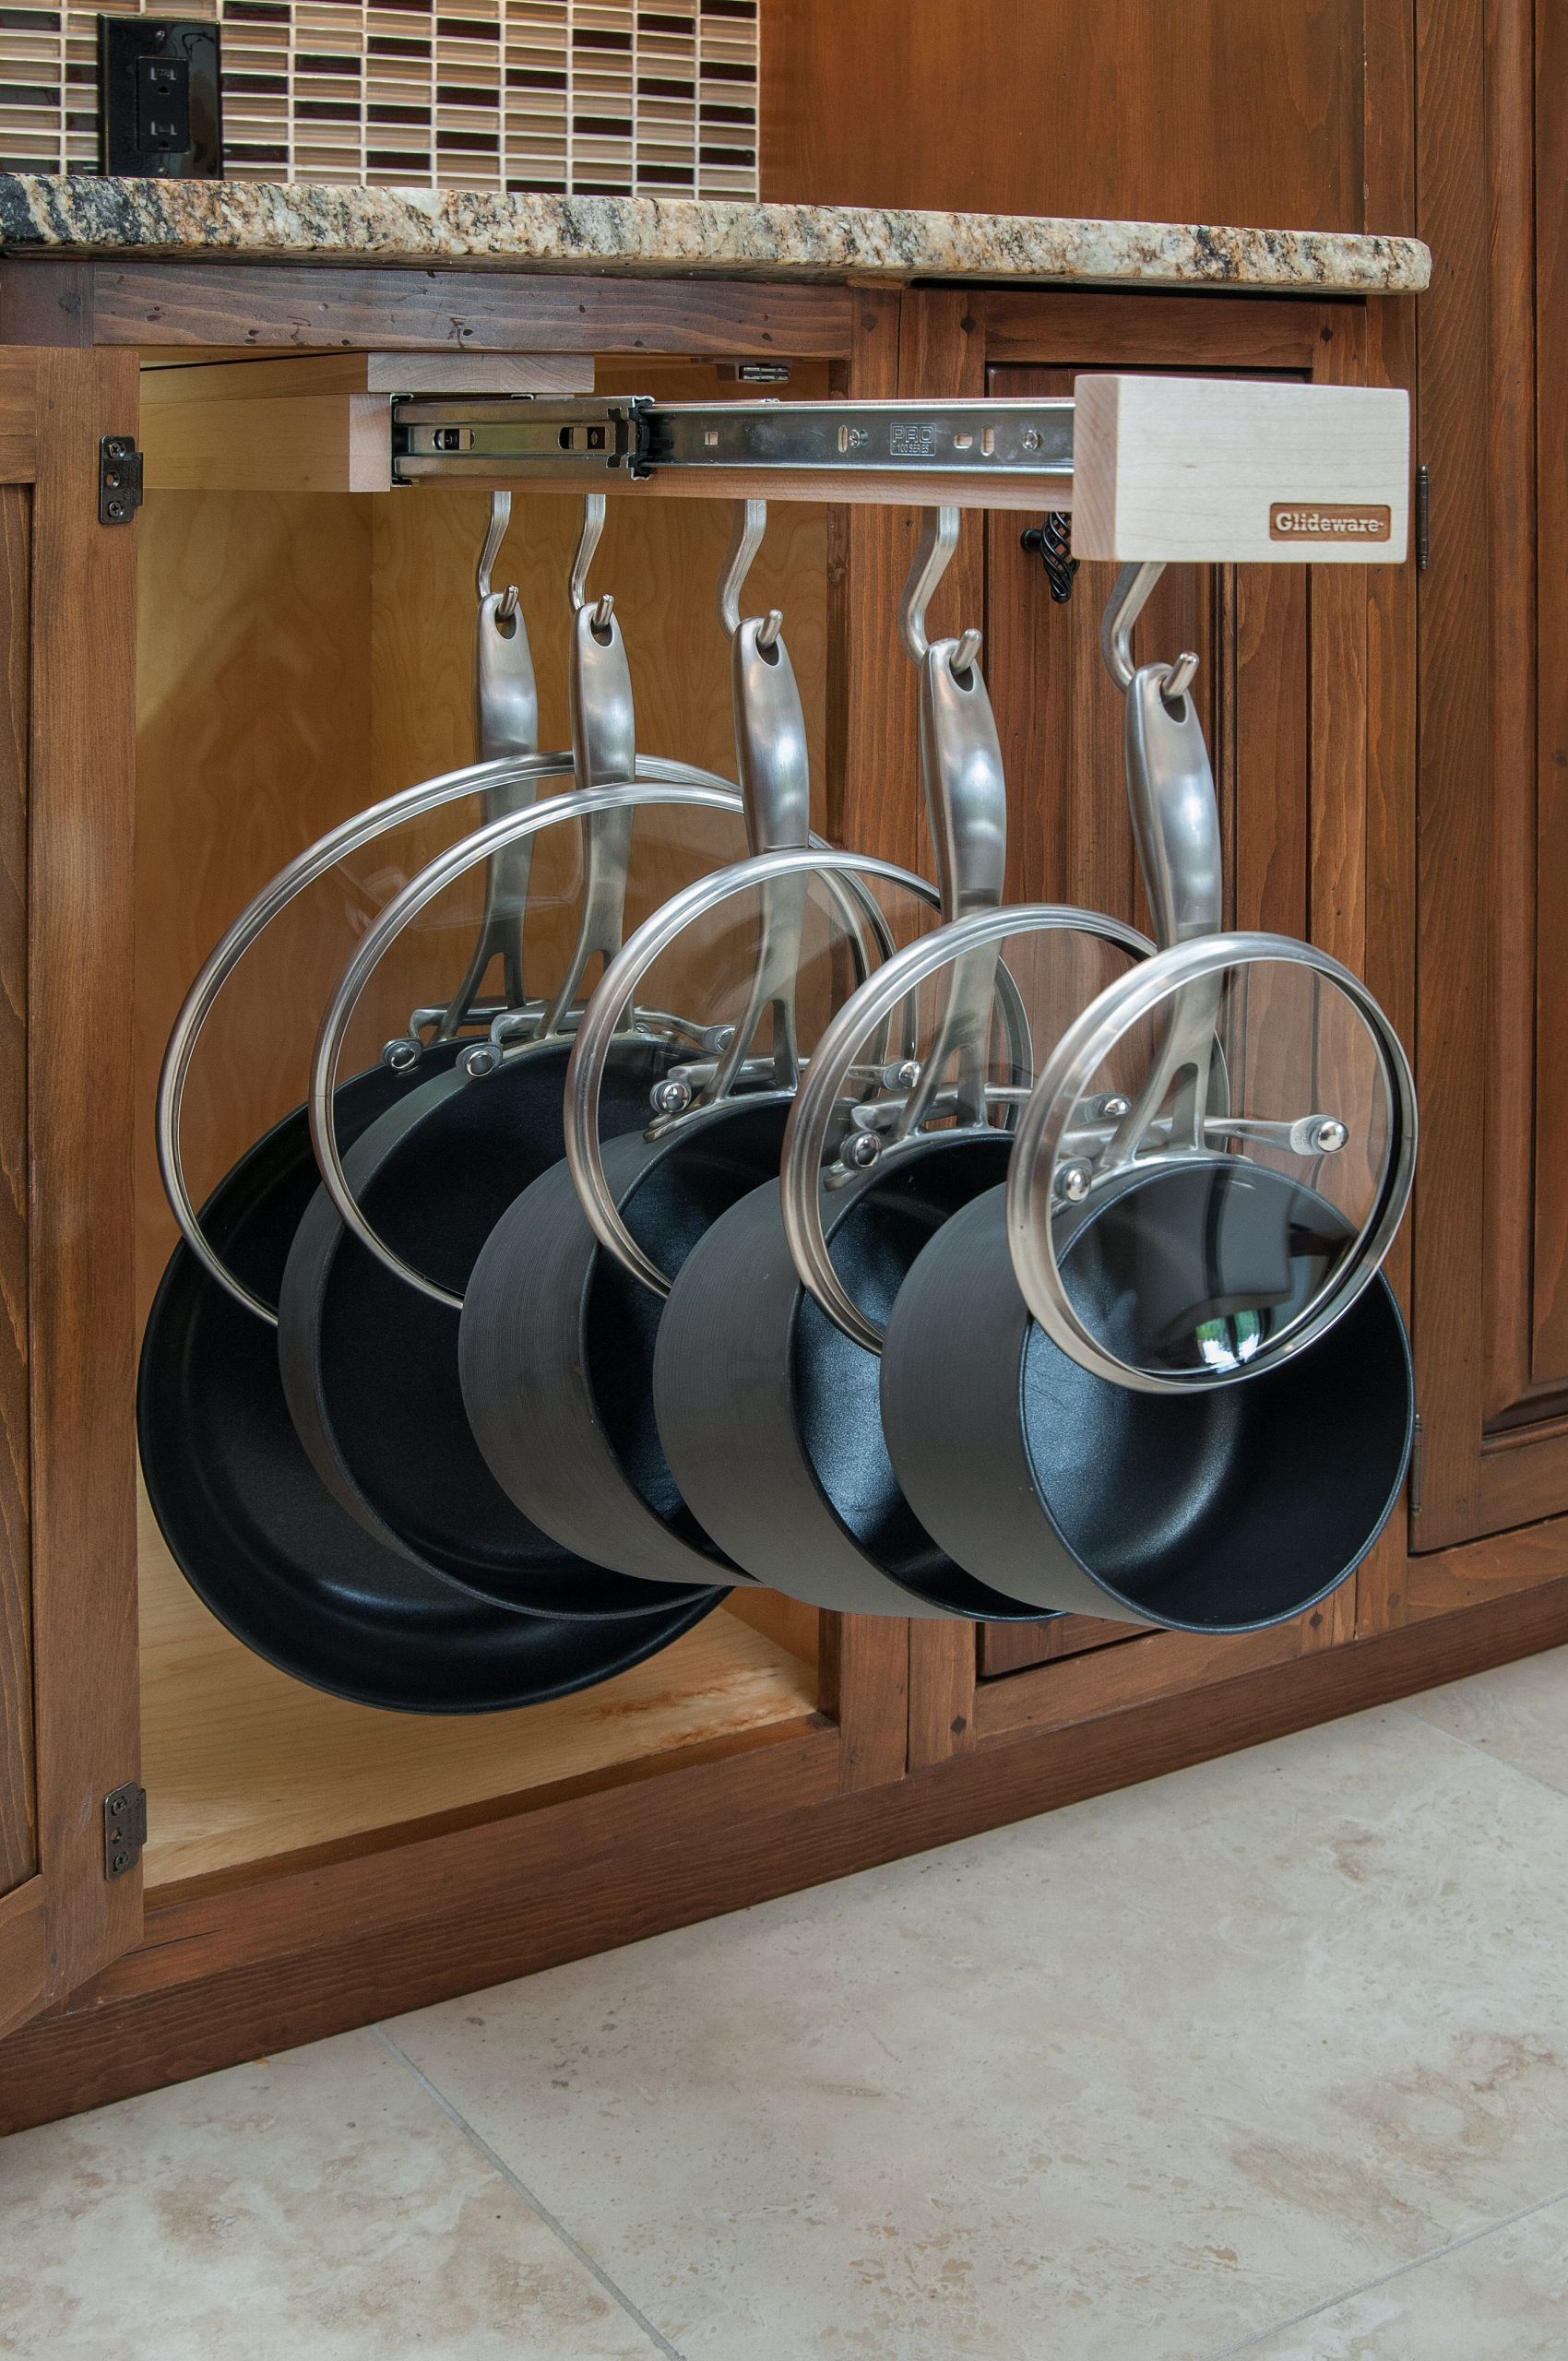 Kitchen Pots And Pans Storage
 Great way to organize your pots pans